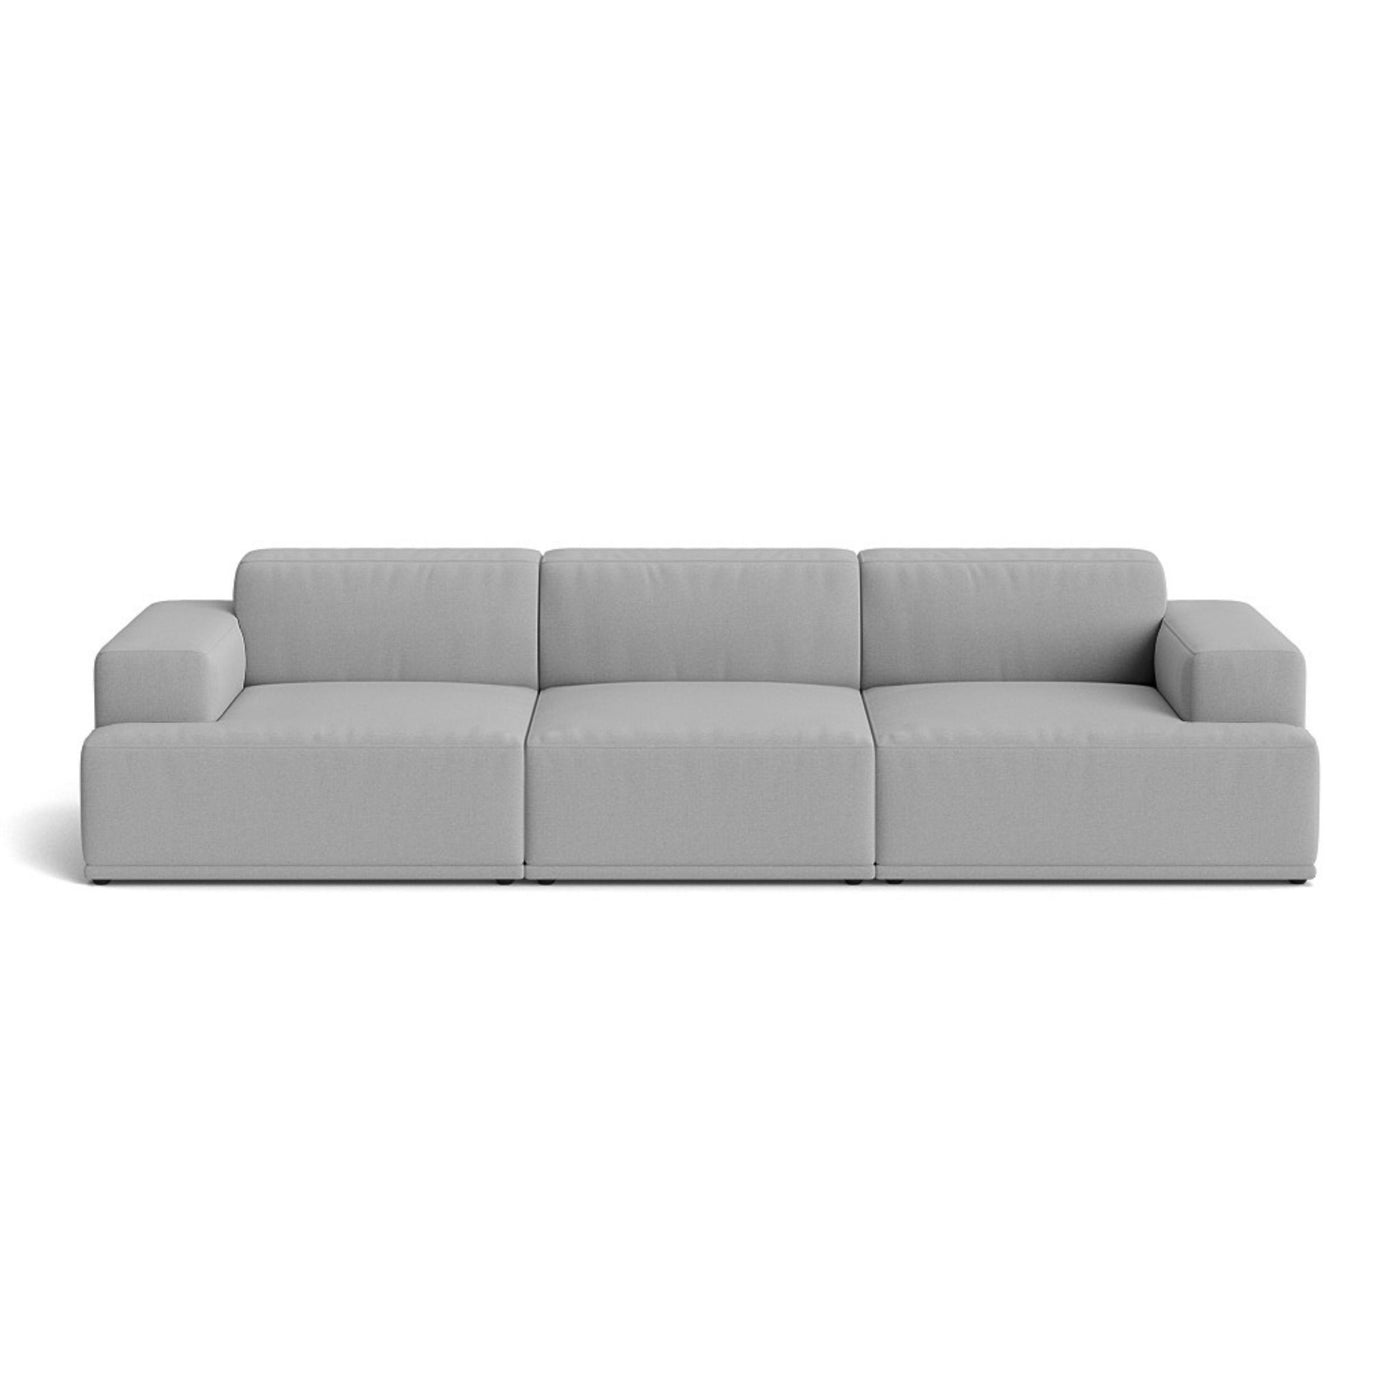 Muuto Connect Soft Modular 3 Seater Sofa, configuration 1. Made-to-order from someday designs. #colour_steelcut-trio-133